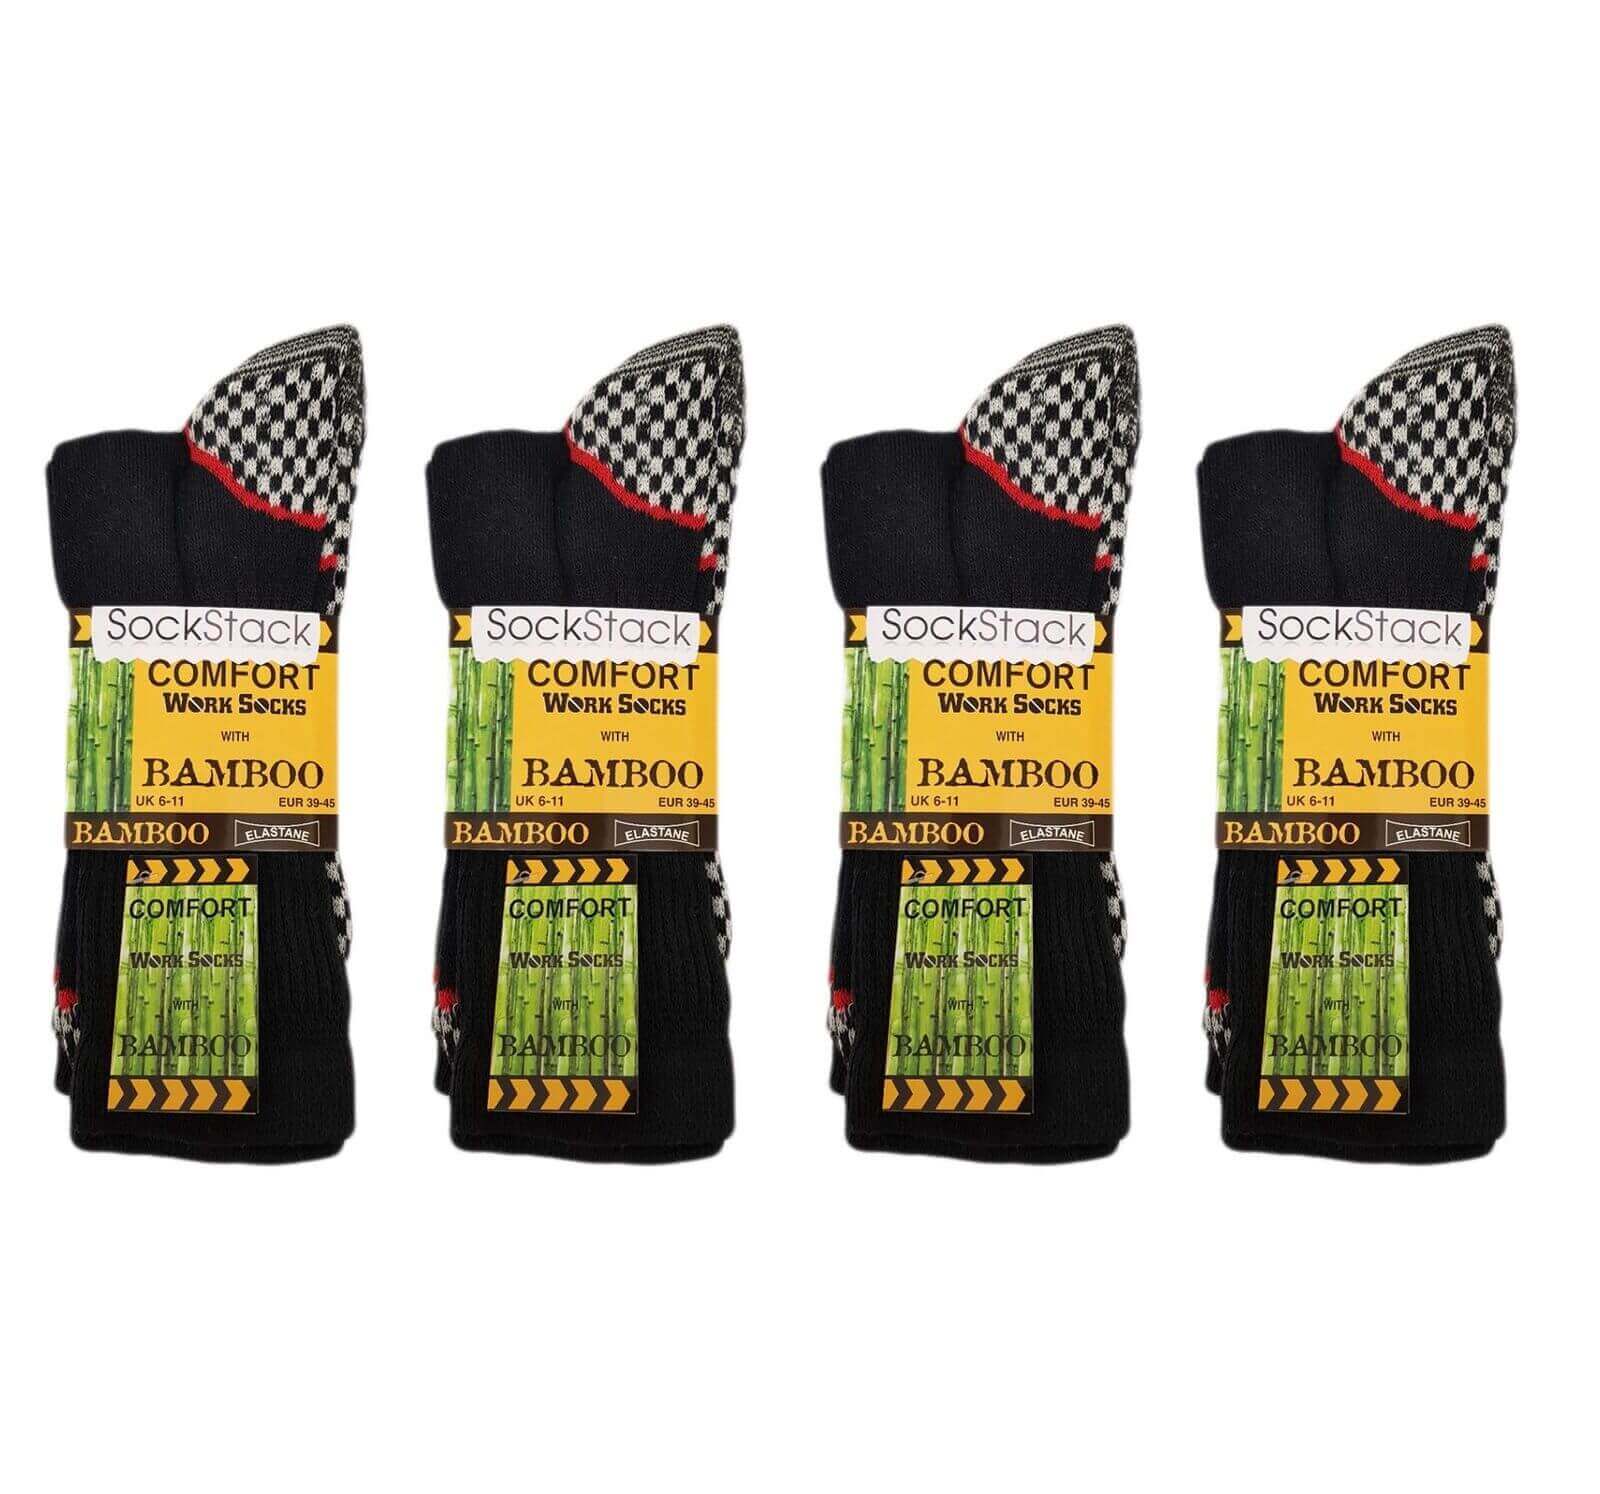 6 Pairs Of Men's Bamboo Work Socks, Ultimate Work Boot Socks. Buy now for £10.00. A Socks by Sock Stack. 6-11, anti bacterial, anti blister, assorted, bamboo, baselayer, black, boot, boys, comfortable, cosy, cotton, elastane, mens, mens socks, office, pol